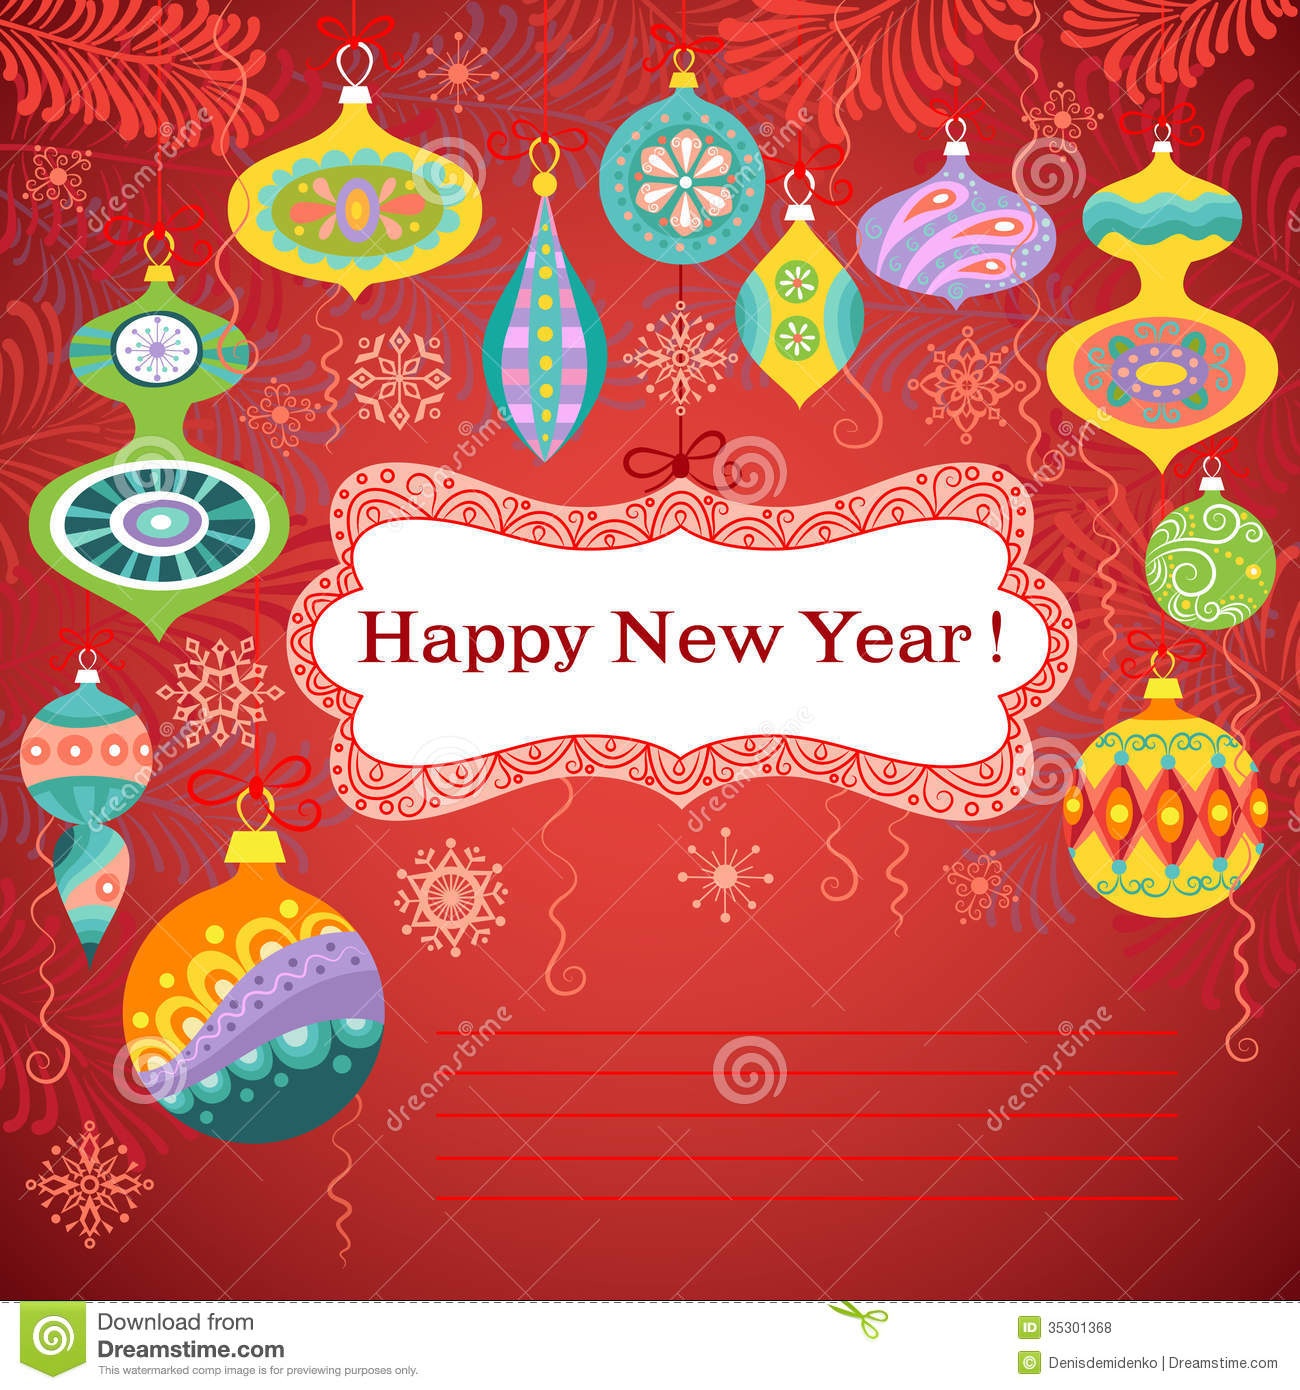 Happy New Year Card Stock Vector. Illustration Of Banner - 35301368 - Free Printable Happy New Year Cards